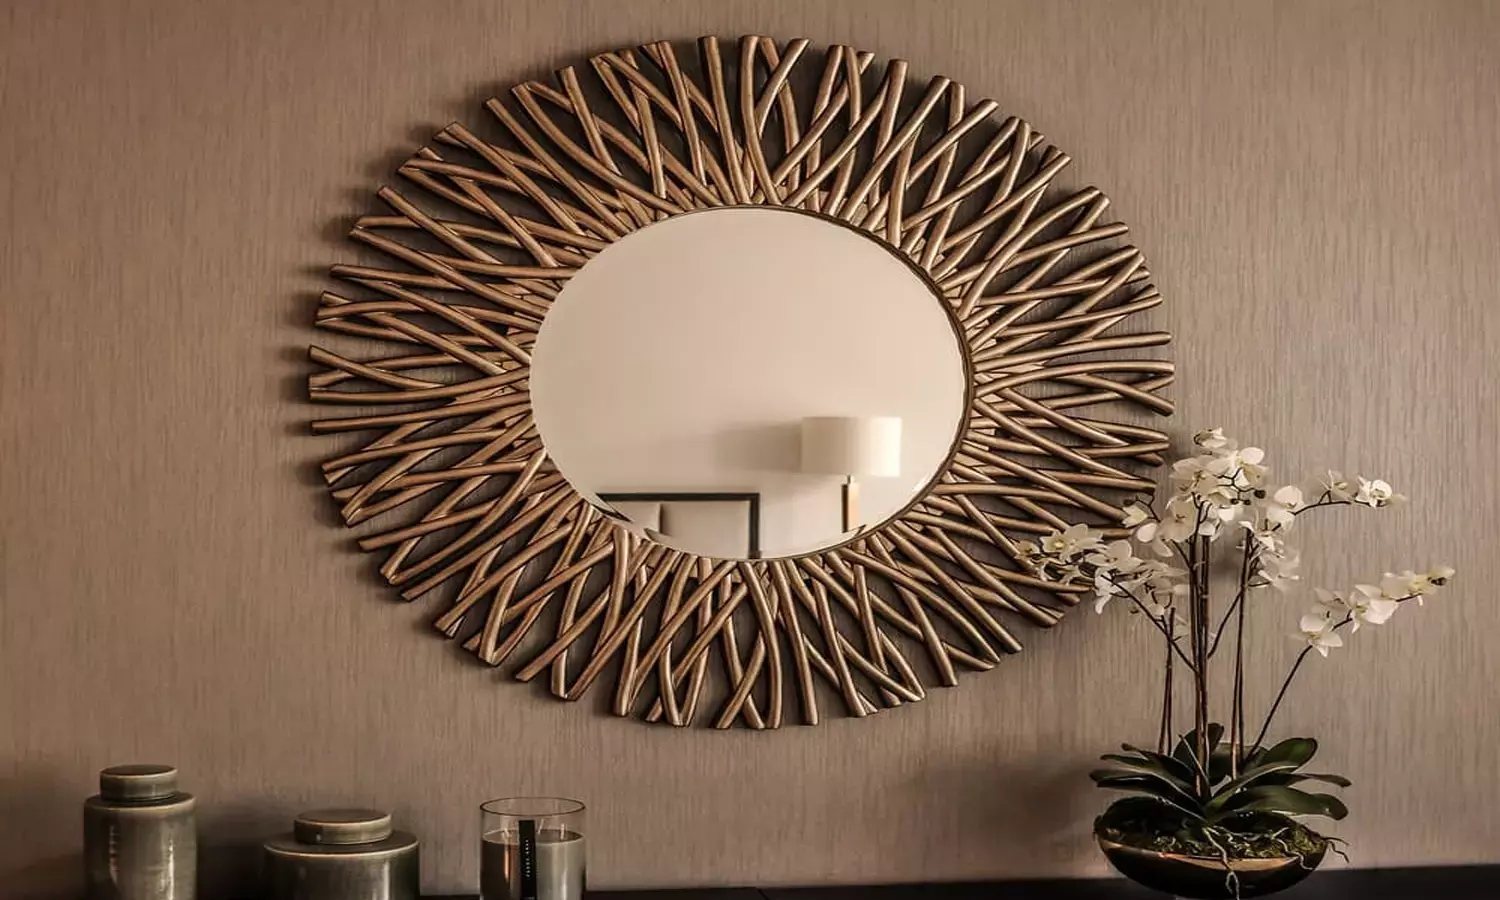 You should have lots of mirrors in your home; heres why